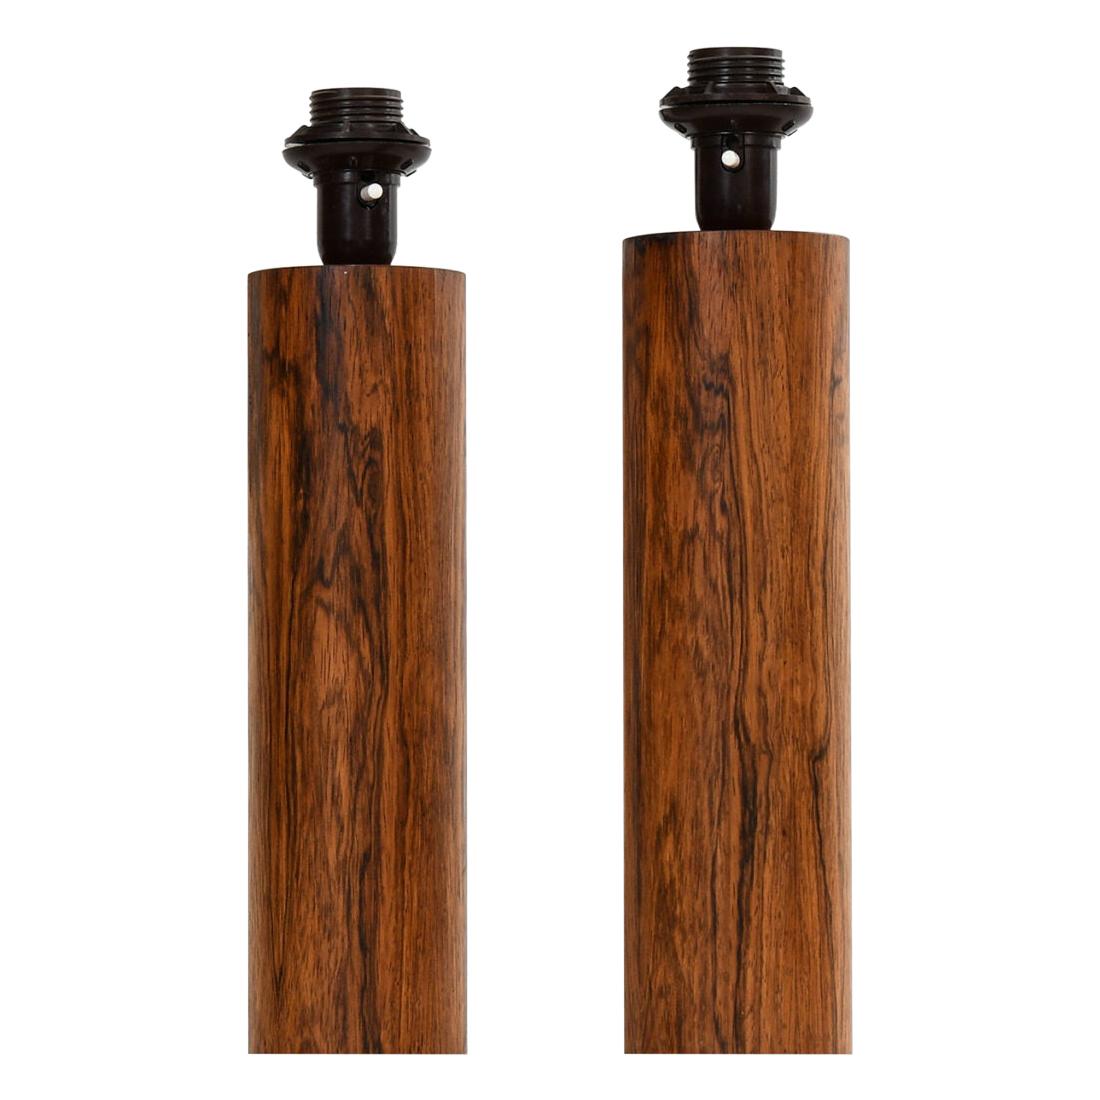 Table Lamps Attributed to Uno & Östen Kristiansson Probably Produced by Luxus